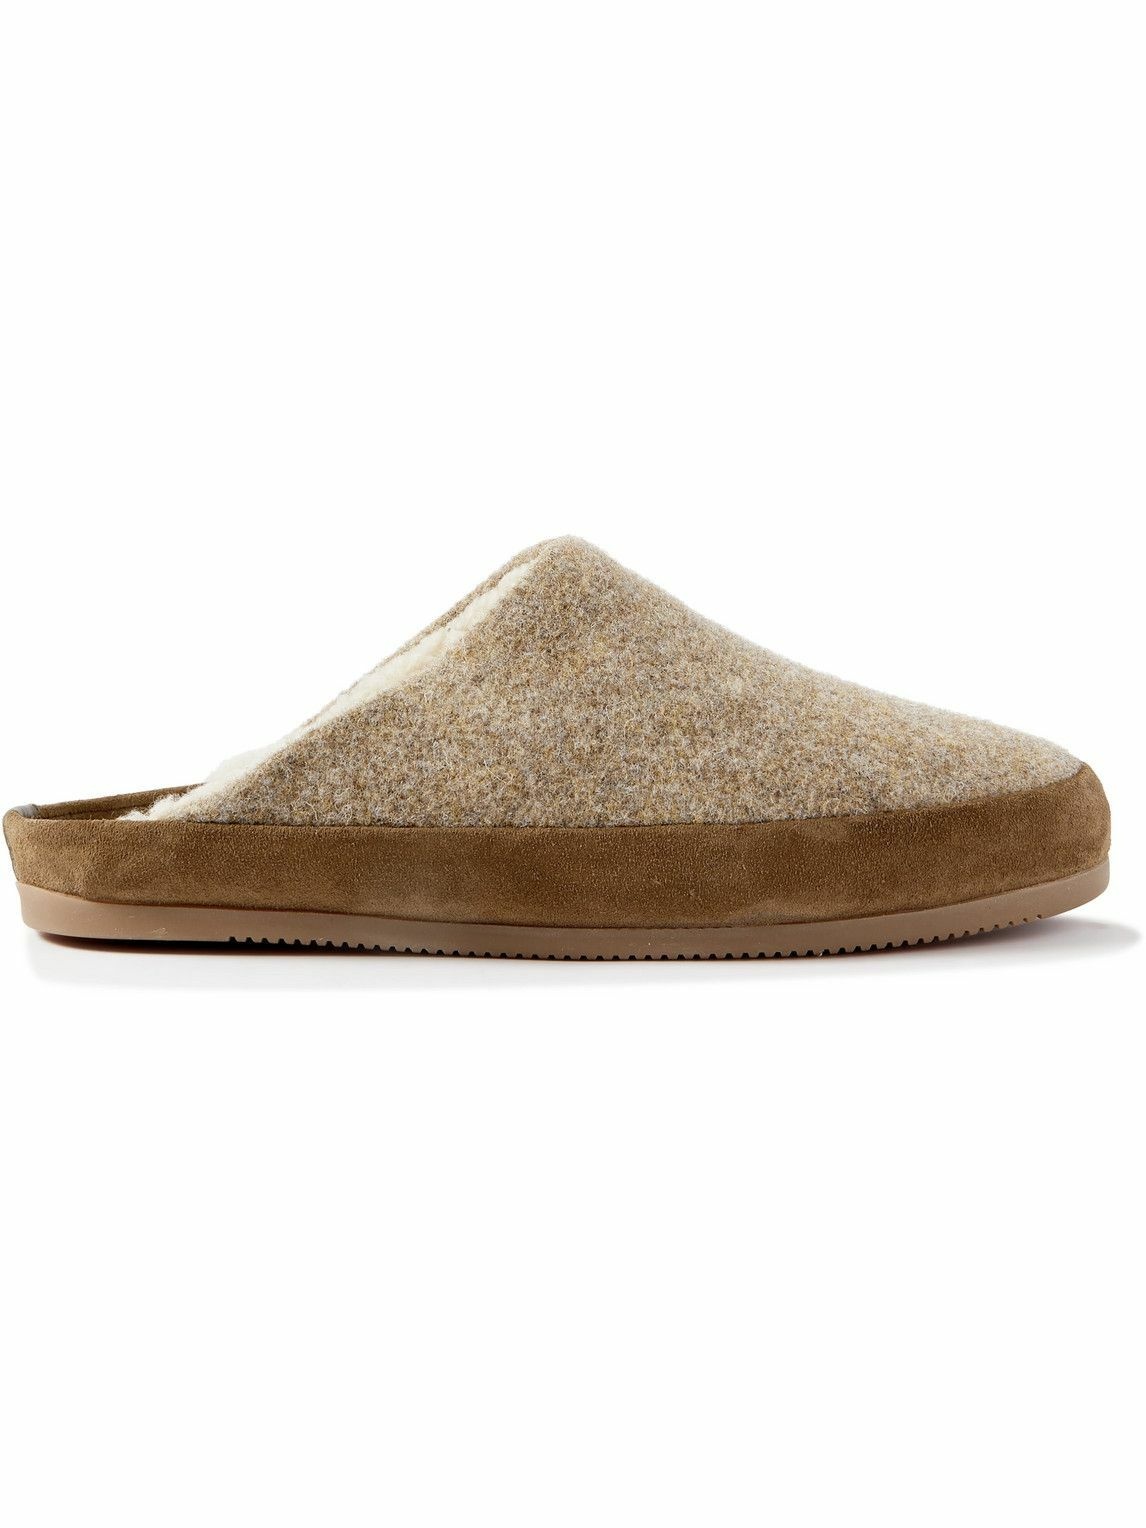 Photo: Mulo - Suede-Trimmed Shearling-Lined Recycled-Wool Slippers - Brown